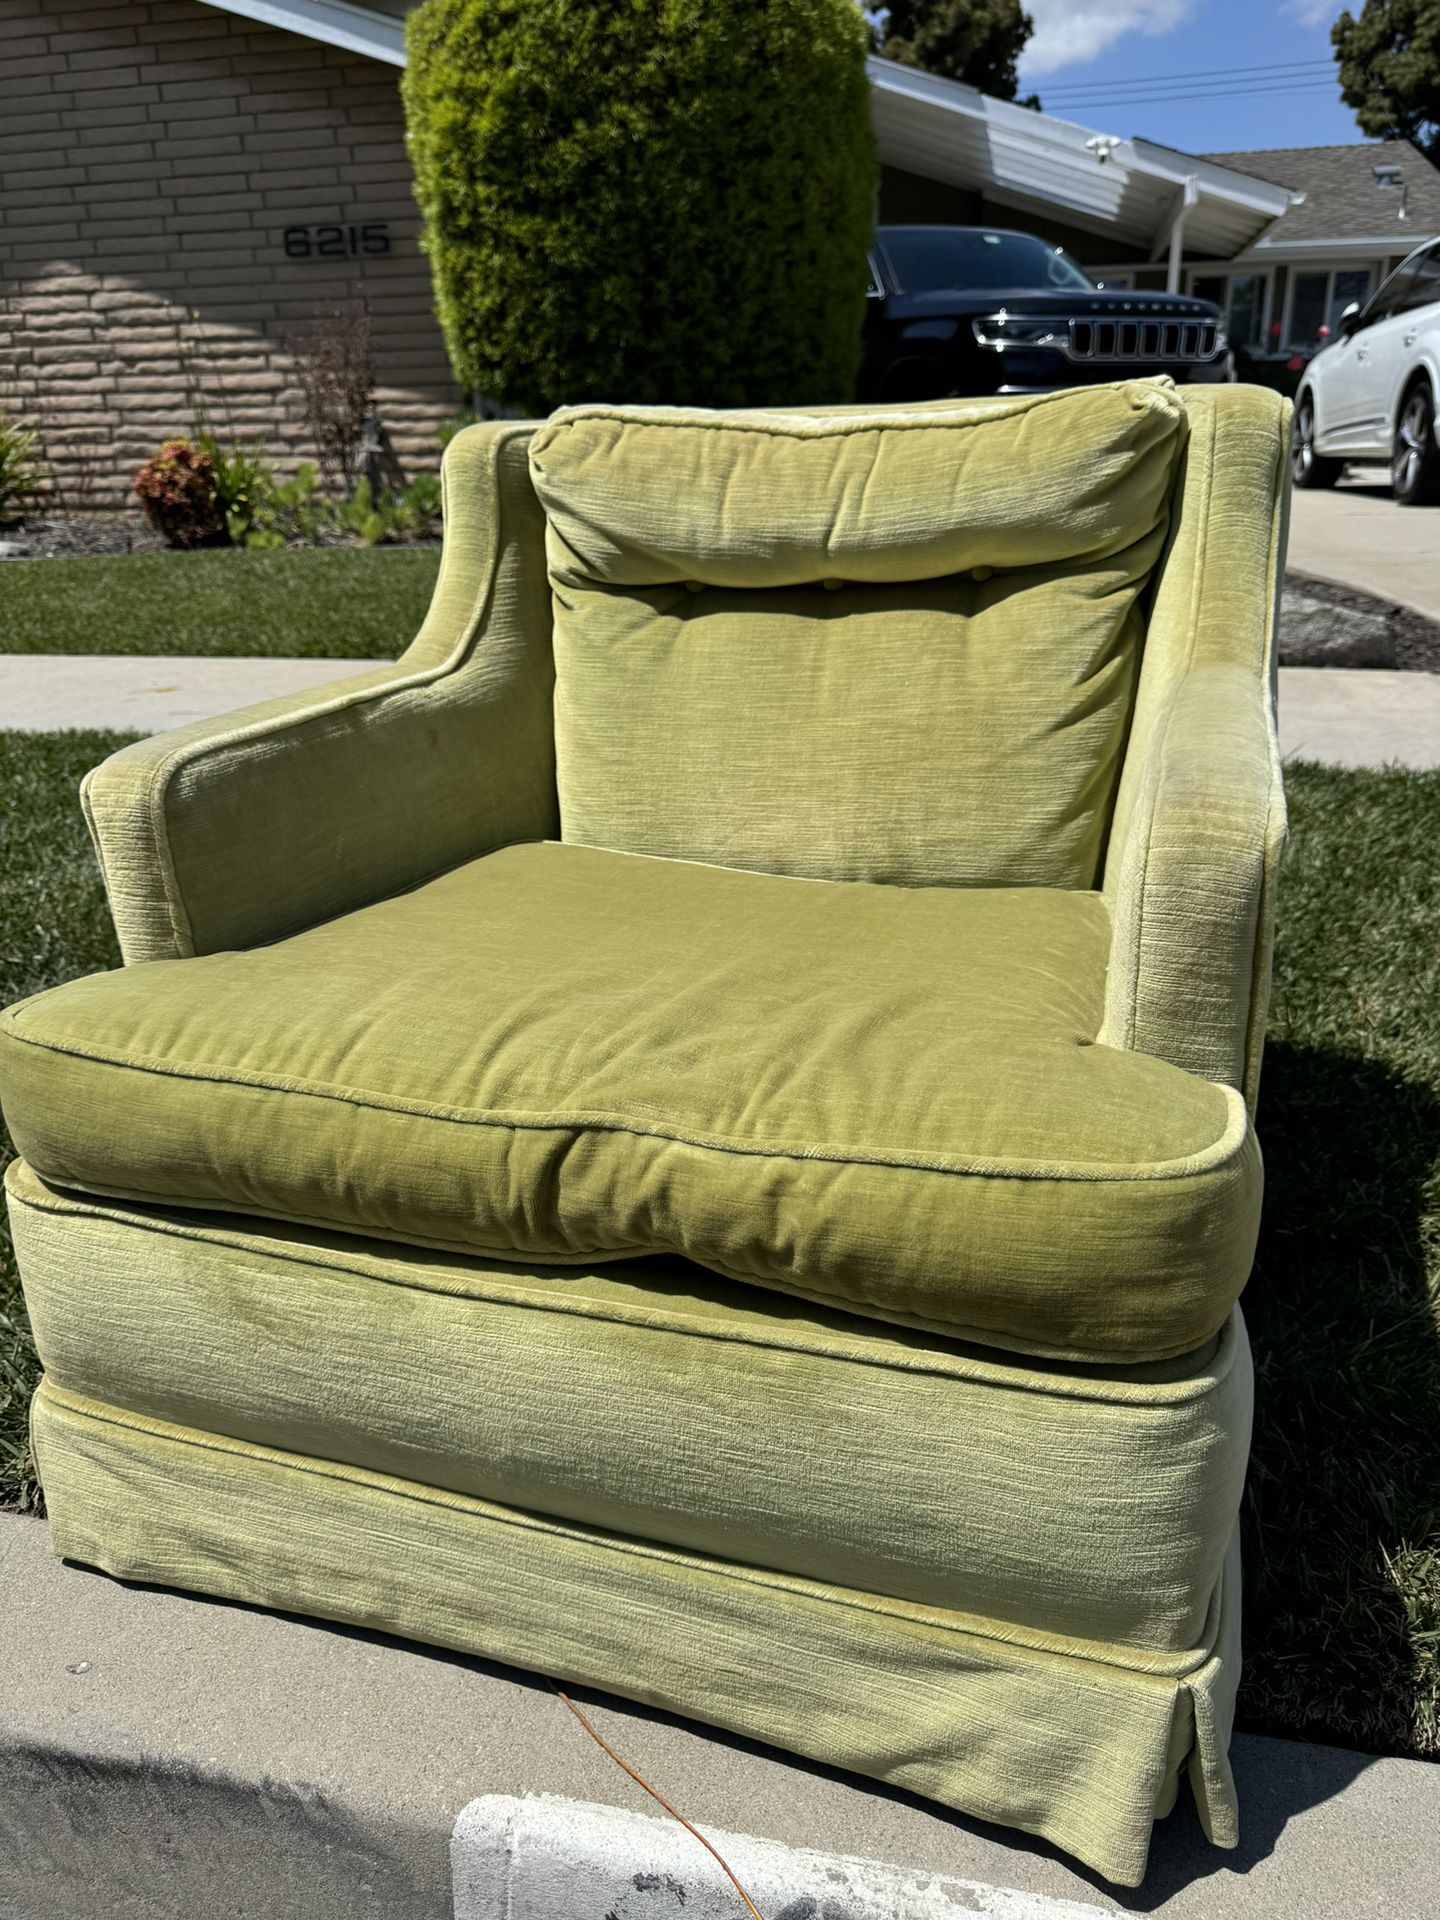 FREE Used Green Armchair